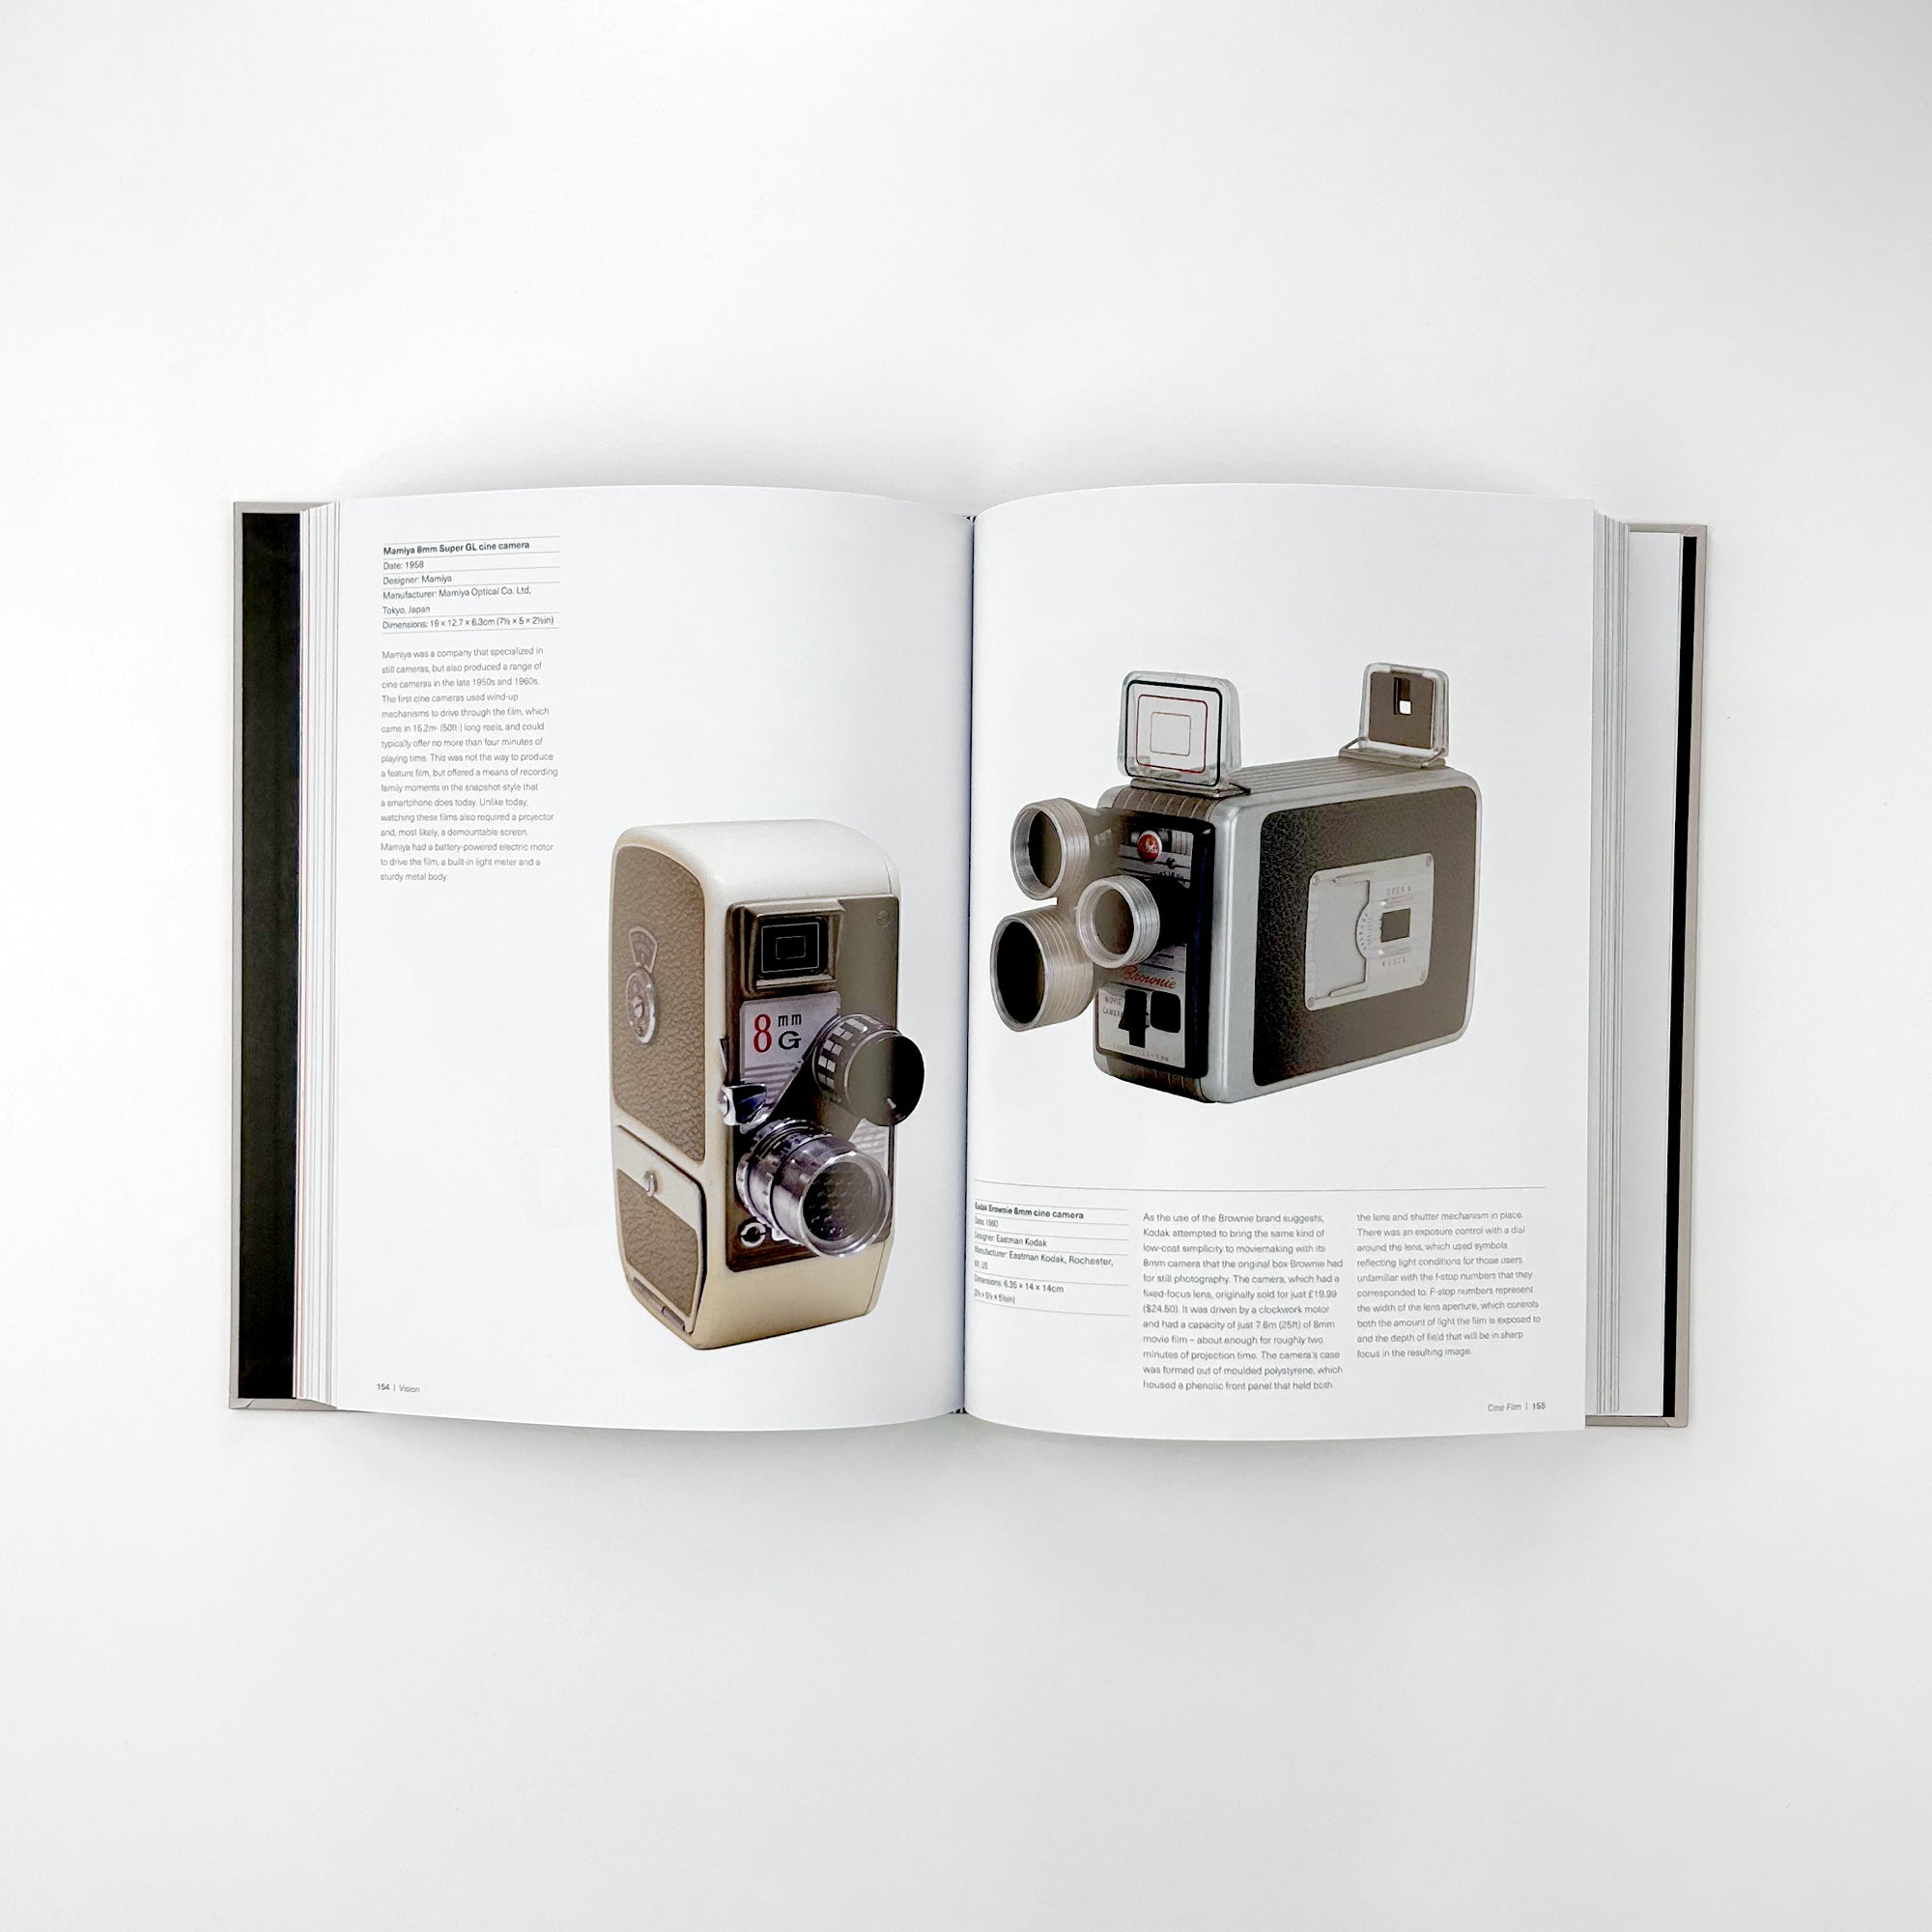 Analogue: A Field Guide – Seconds